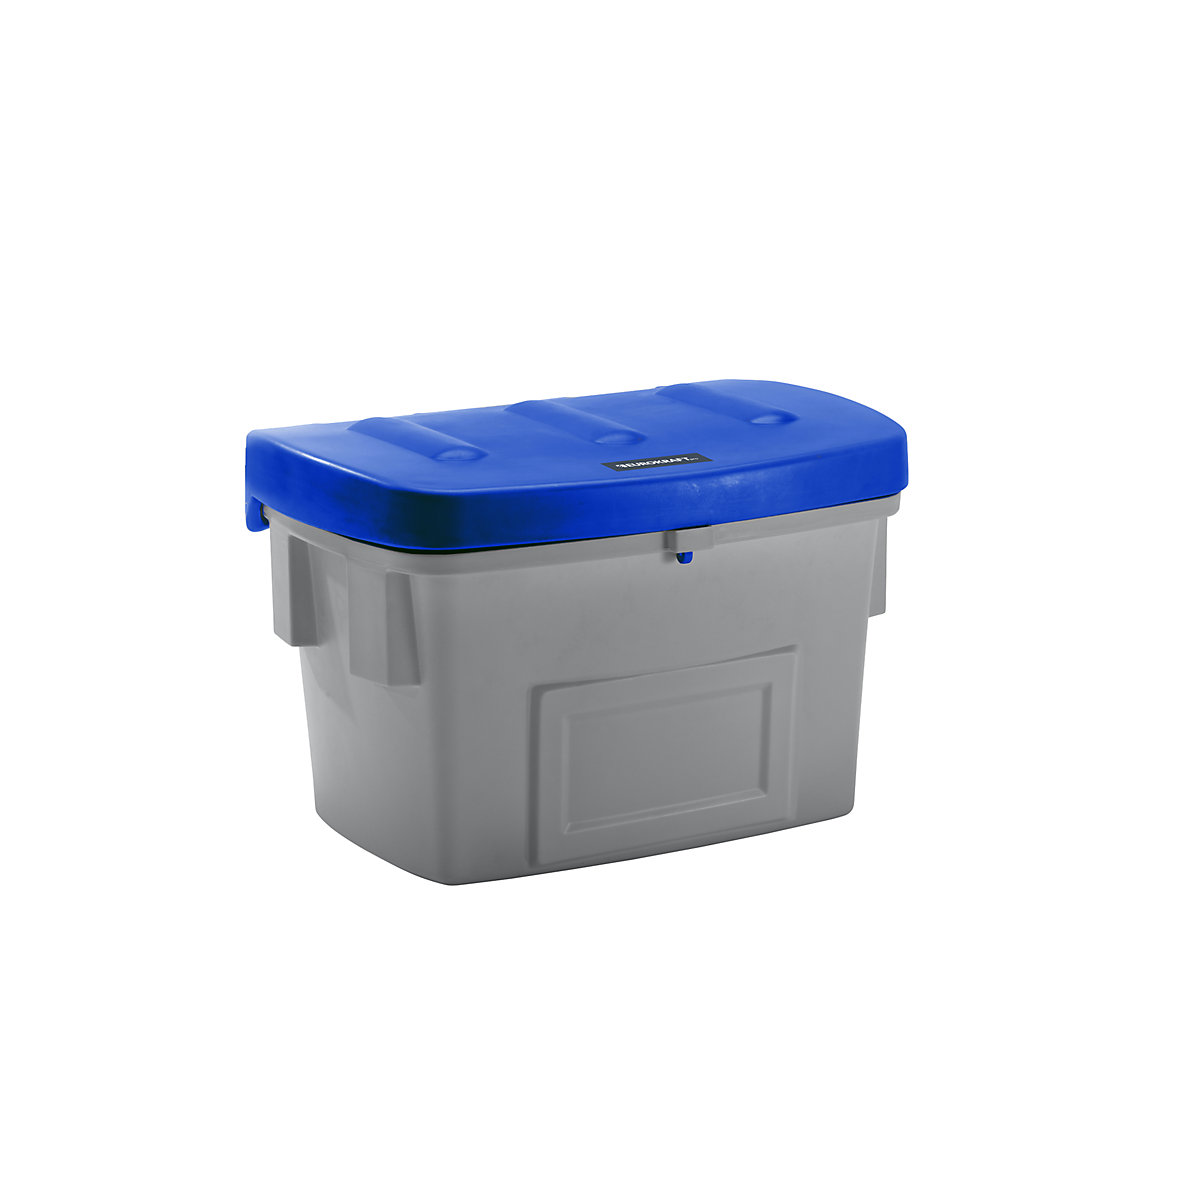 Universal / grit container – eurokraft pro, without dispenser opening, 200 l, blue lid-14